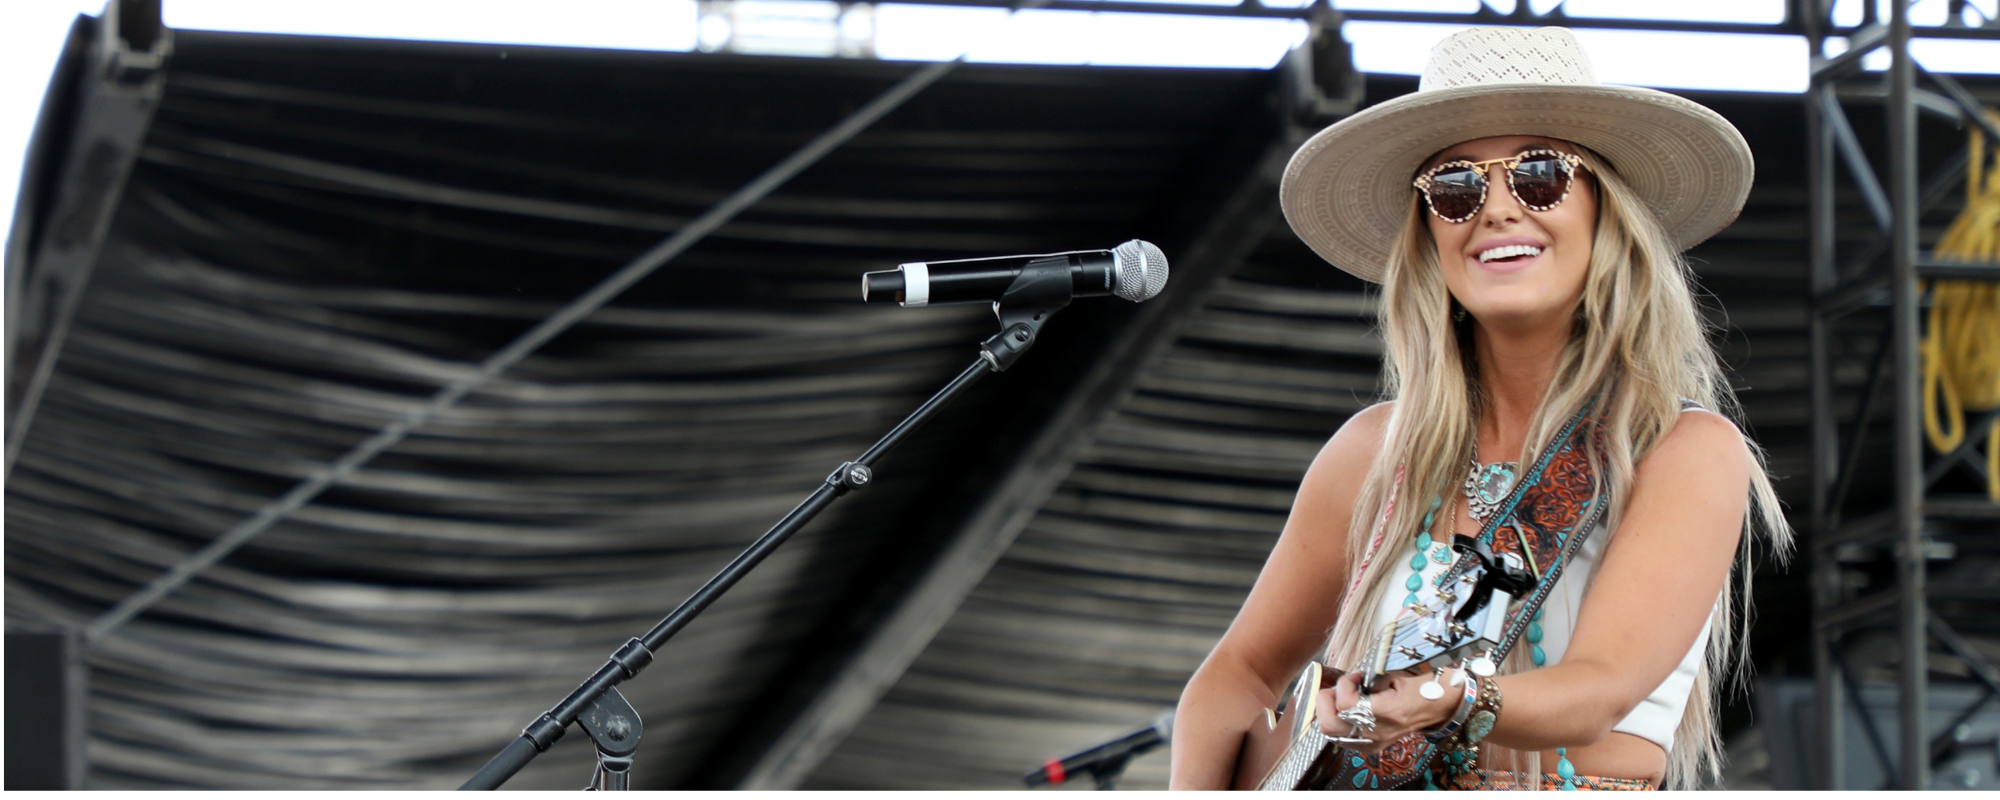 Lainey Wilson on Being Most Nominated CMA Awards Artist: “It’s Crazy How Life Works”